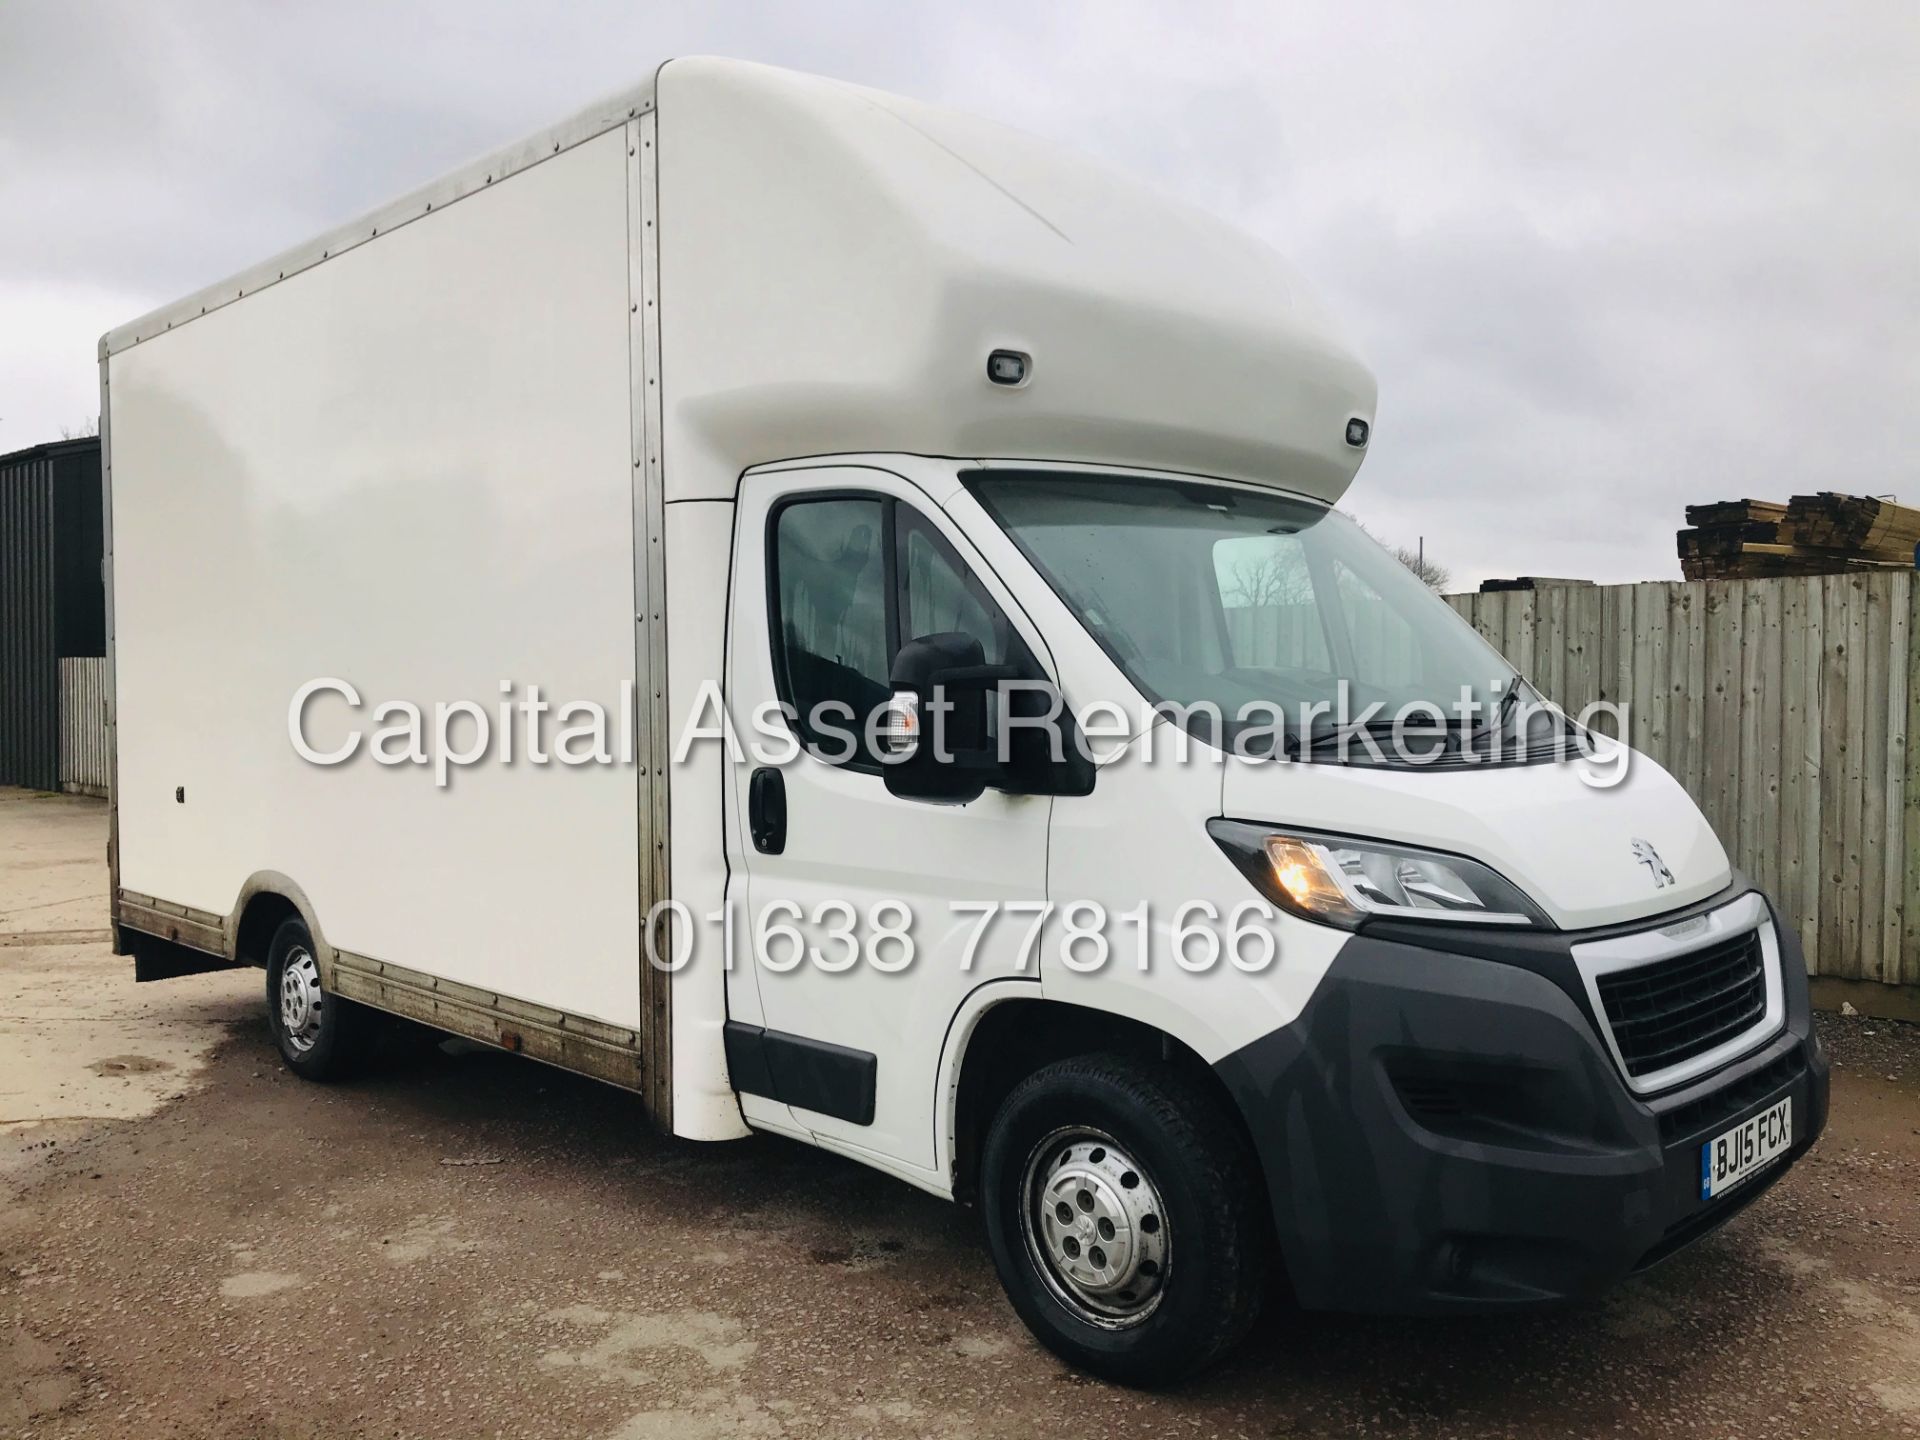 On Sale PEUGEOT BOXER 2.2HDI (130) LONG WHEEL BASE LUTON LOW LOADER" MAXI MOVER - 15 REG - AIR CON - Image 3 of 20